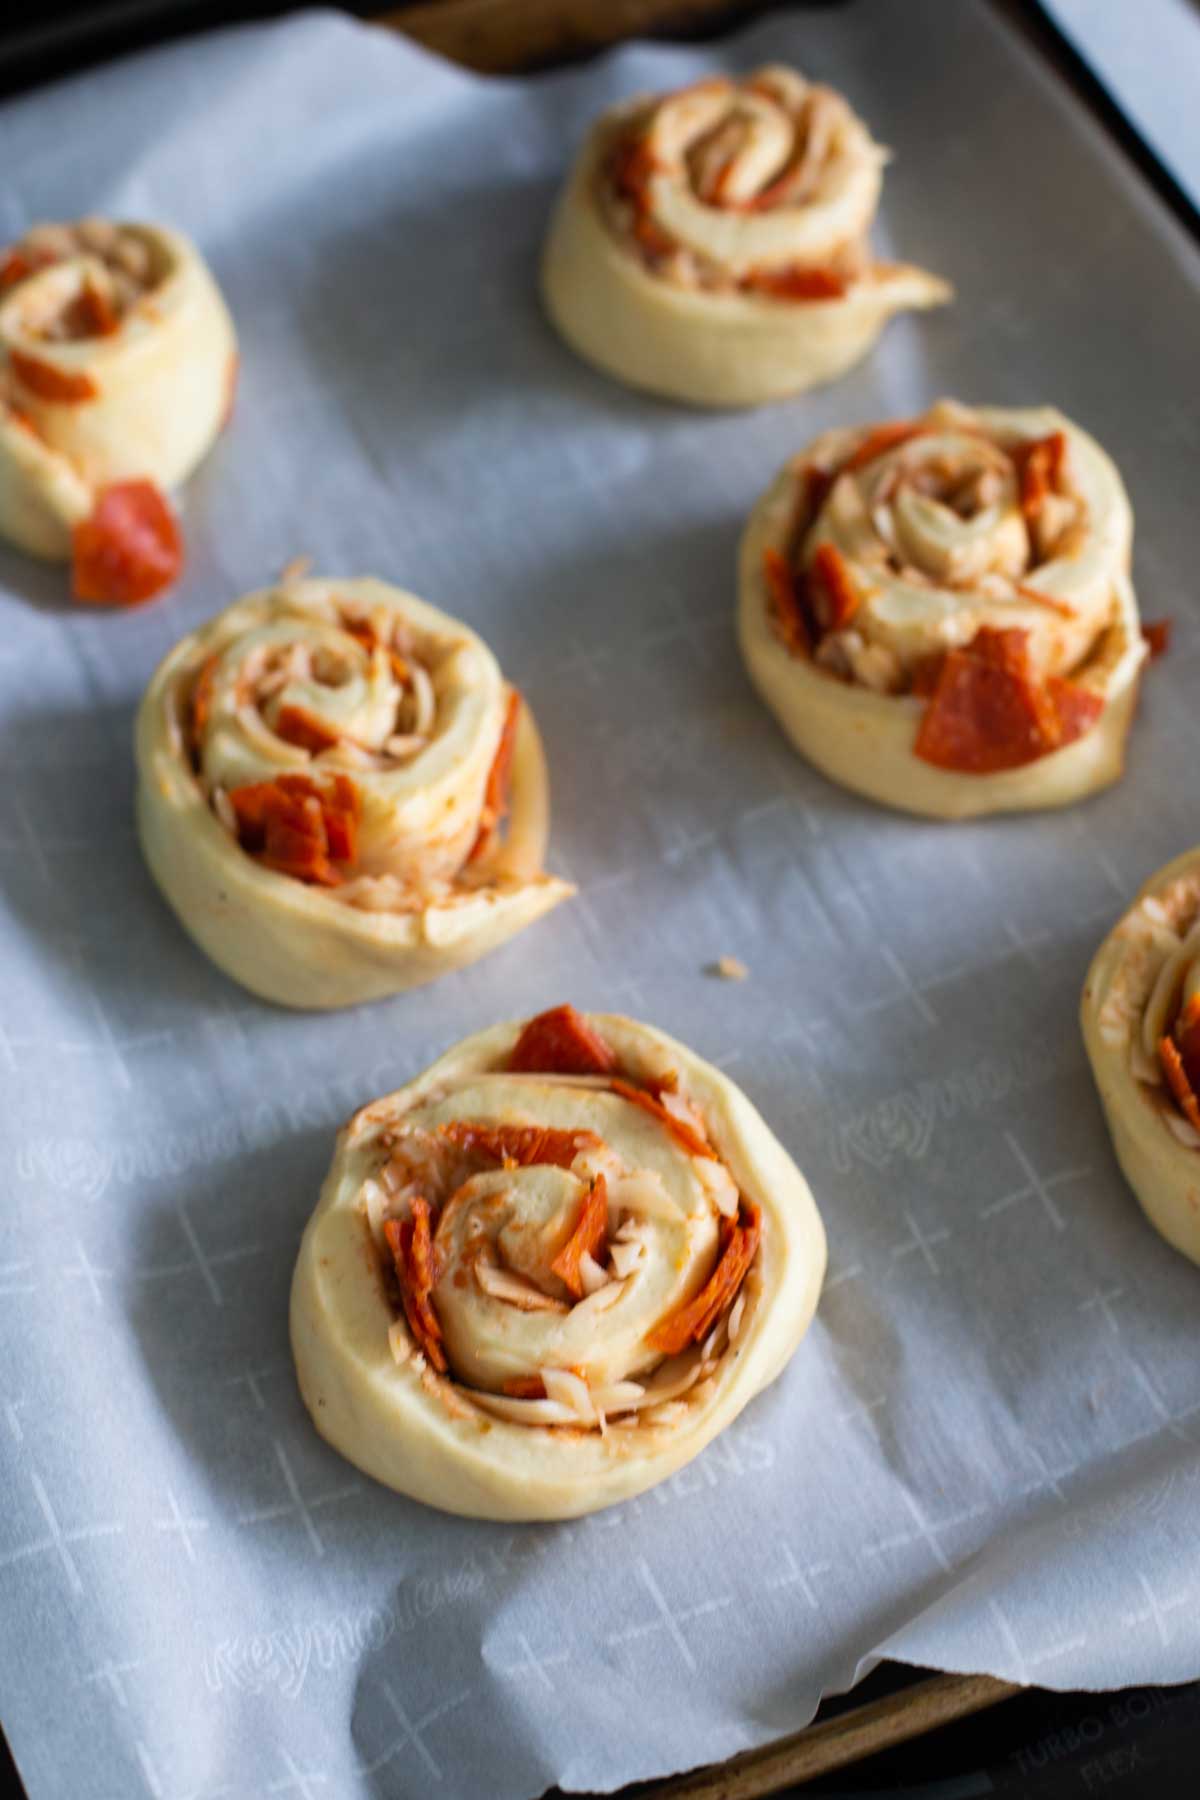 The pizza buns have been placed on a parchment lined baking sheet to rise.